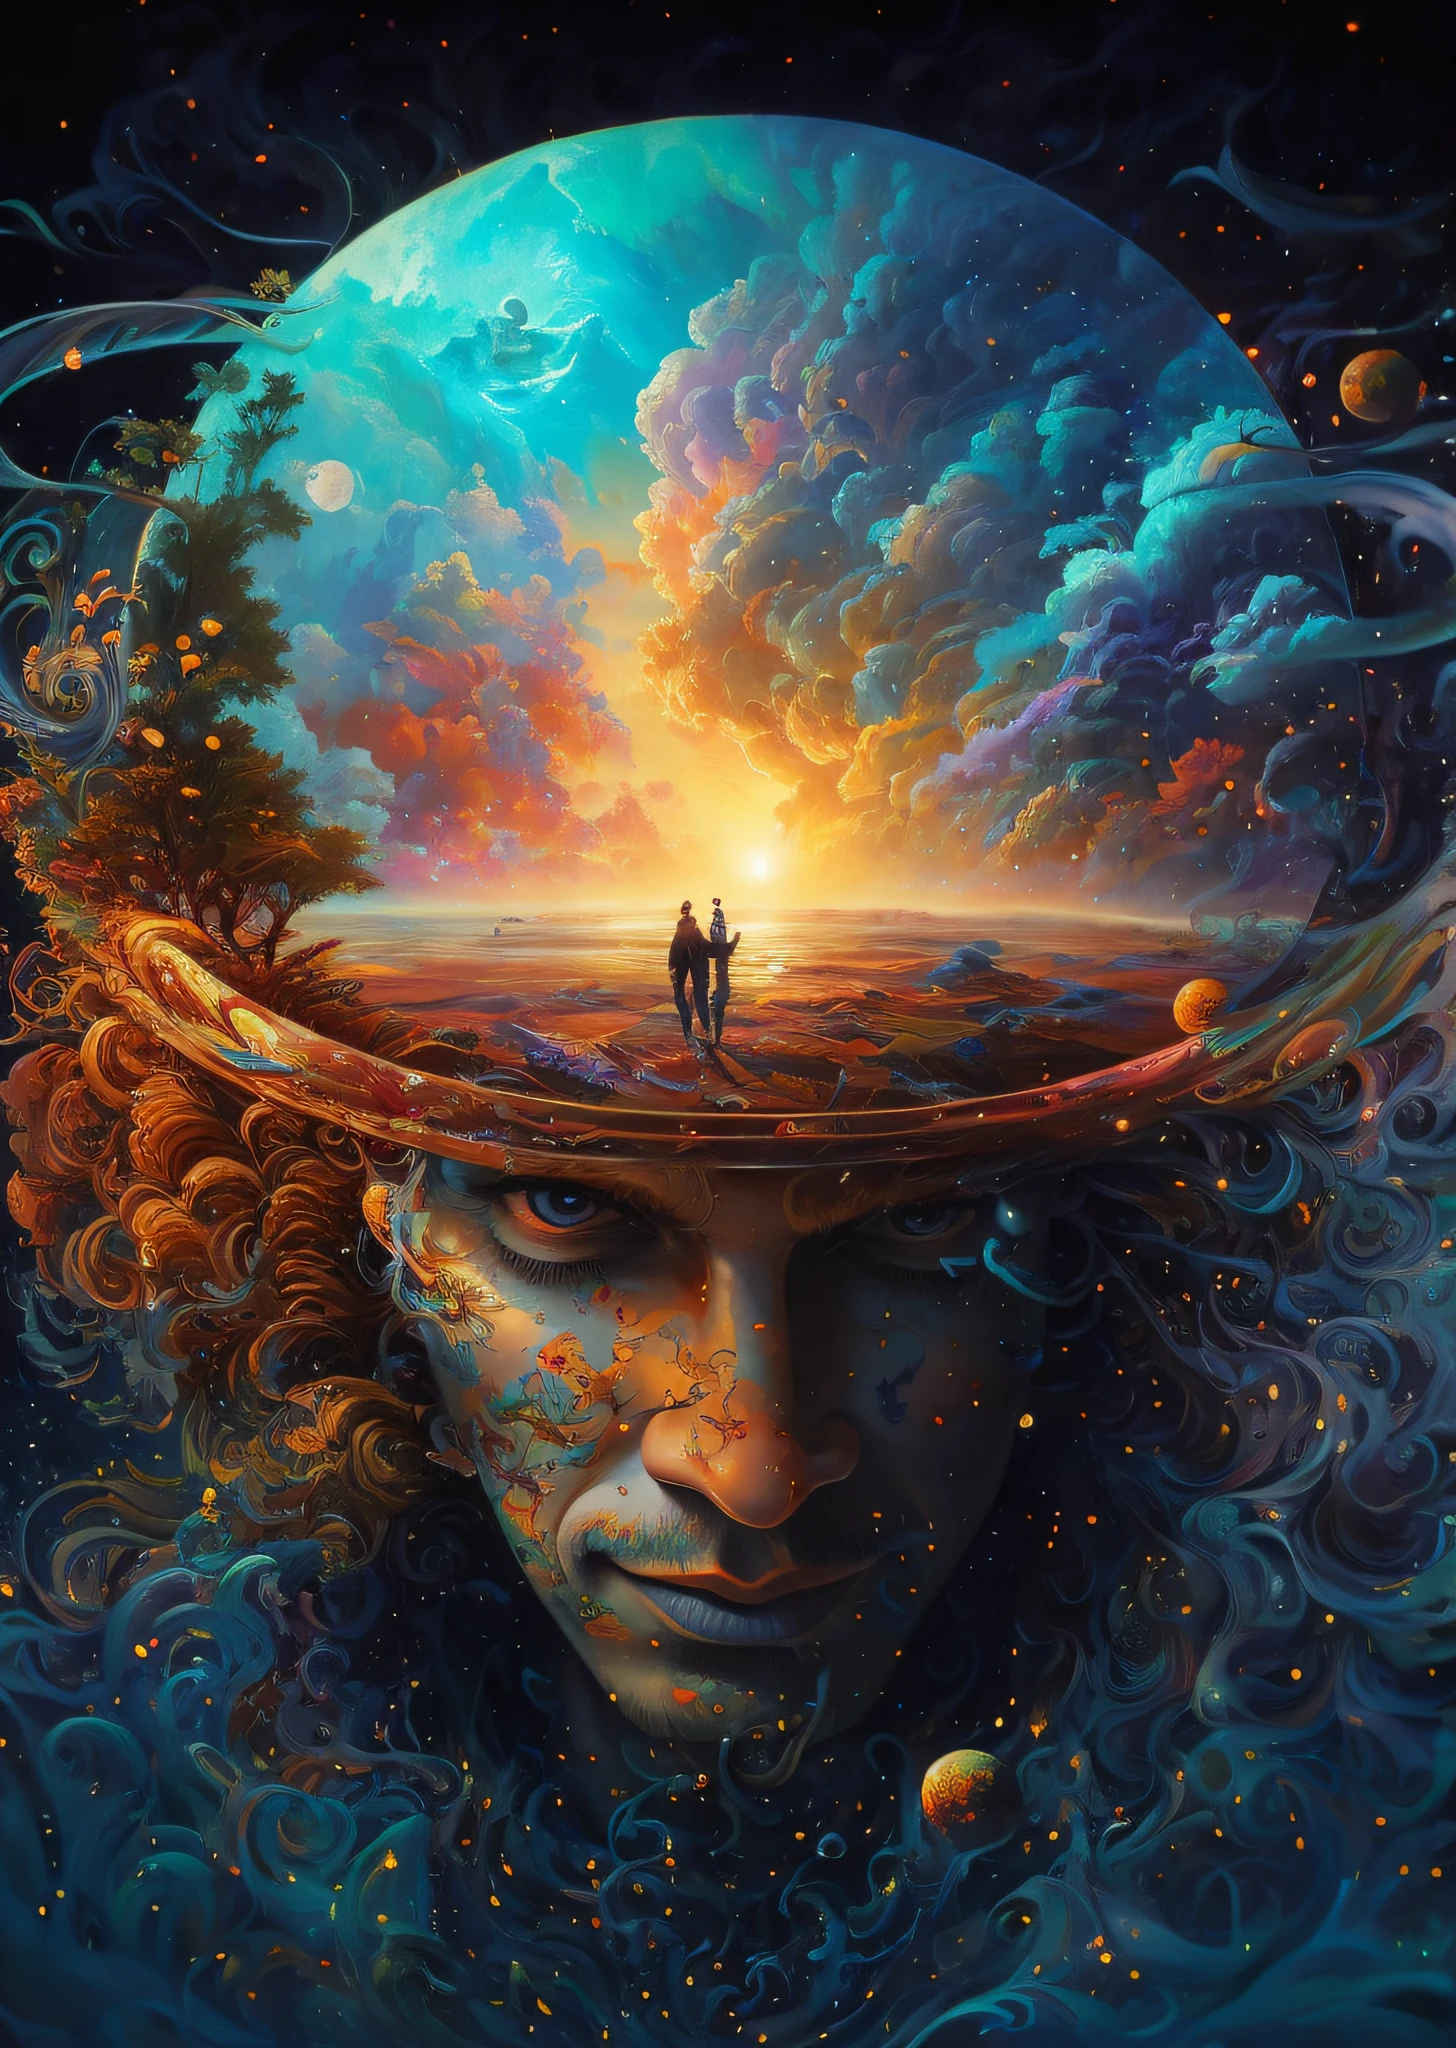 painting of a man with a surreal face and a surreal landscape, psychedelic surreal art, cyril rolando and m. w kaluta, cyril rolando and m.w kaluta, beautiful art uhd 4 k, epic surrealism 8k oil painting, 4k highly detailed digital art, by Cyril Rolando, visionary art style, inspired by Cyril Rolando, consciousness projection